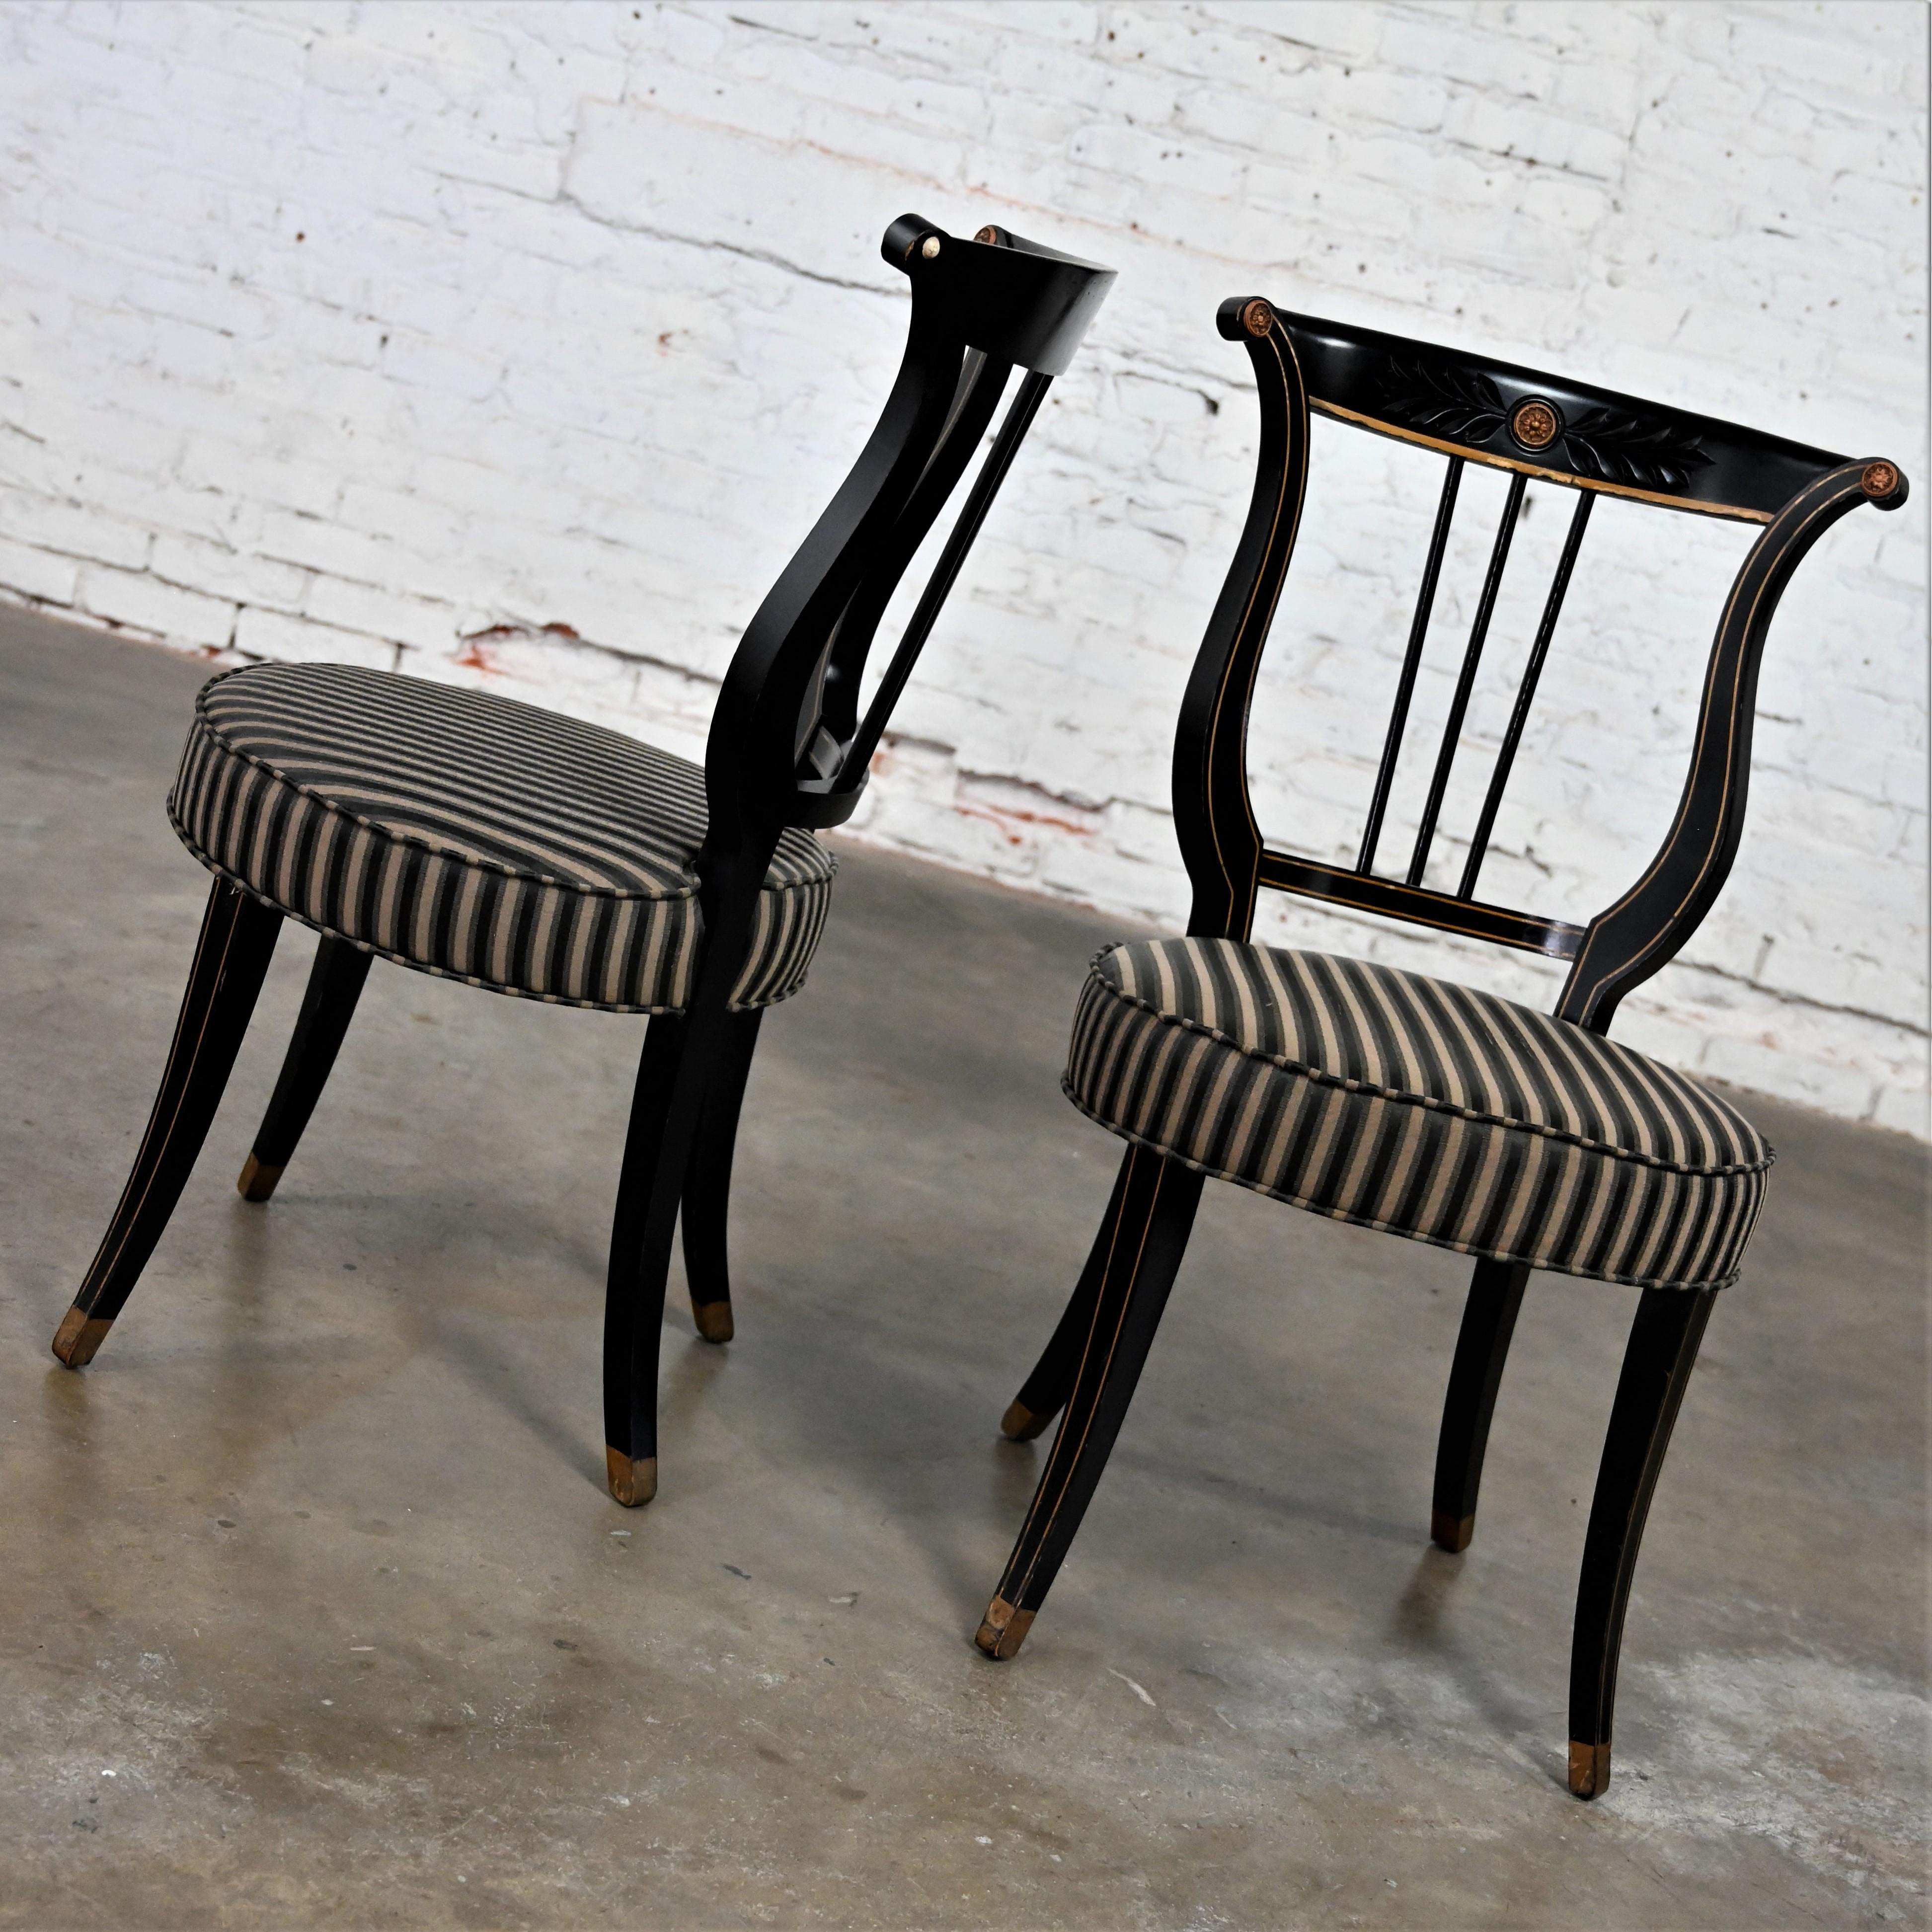 Lovely Early to Mid-20th Century Neoclassical black & gold painted lyre back accent or occasional chairs with round seats & black, beige, and gray striped fabric, a pair. Beautiful condition, keeping in mind that these are vintage and not new so